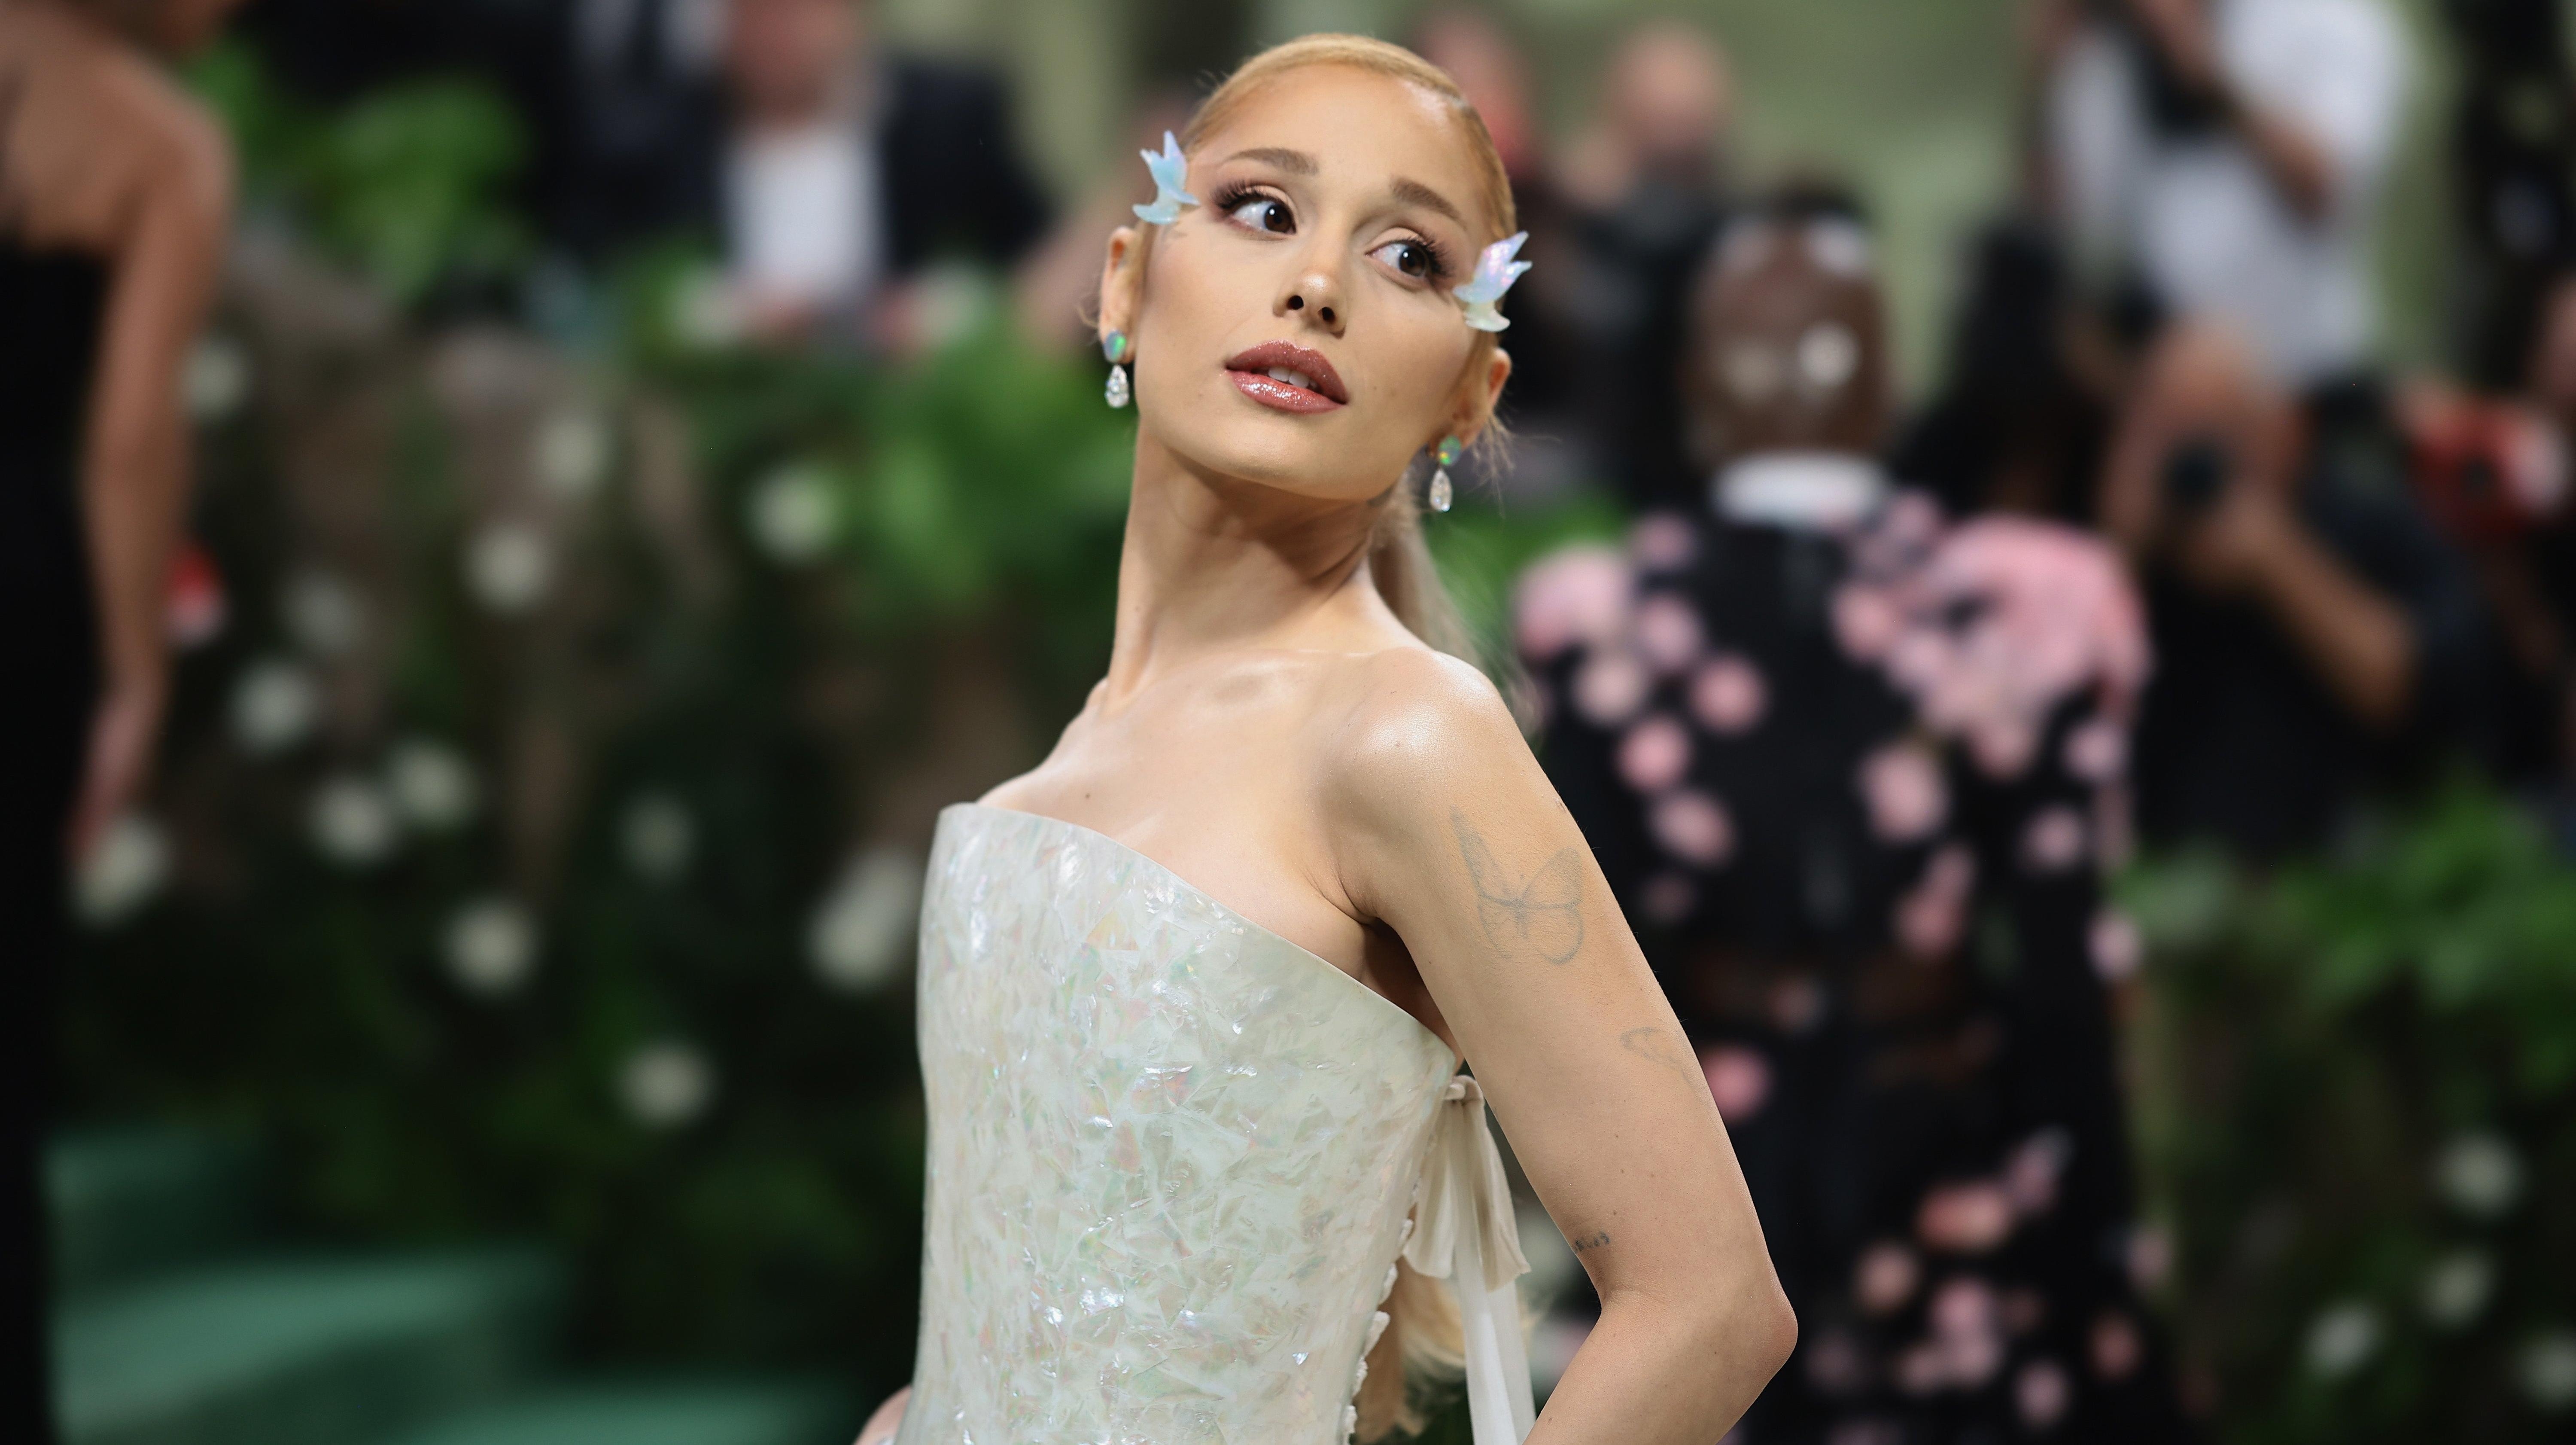 Ariana Grande says she’s “reprocessing” her history with Nickelodeon